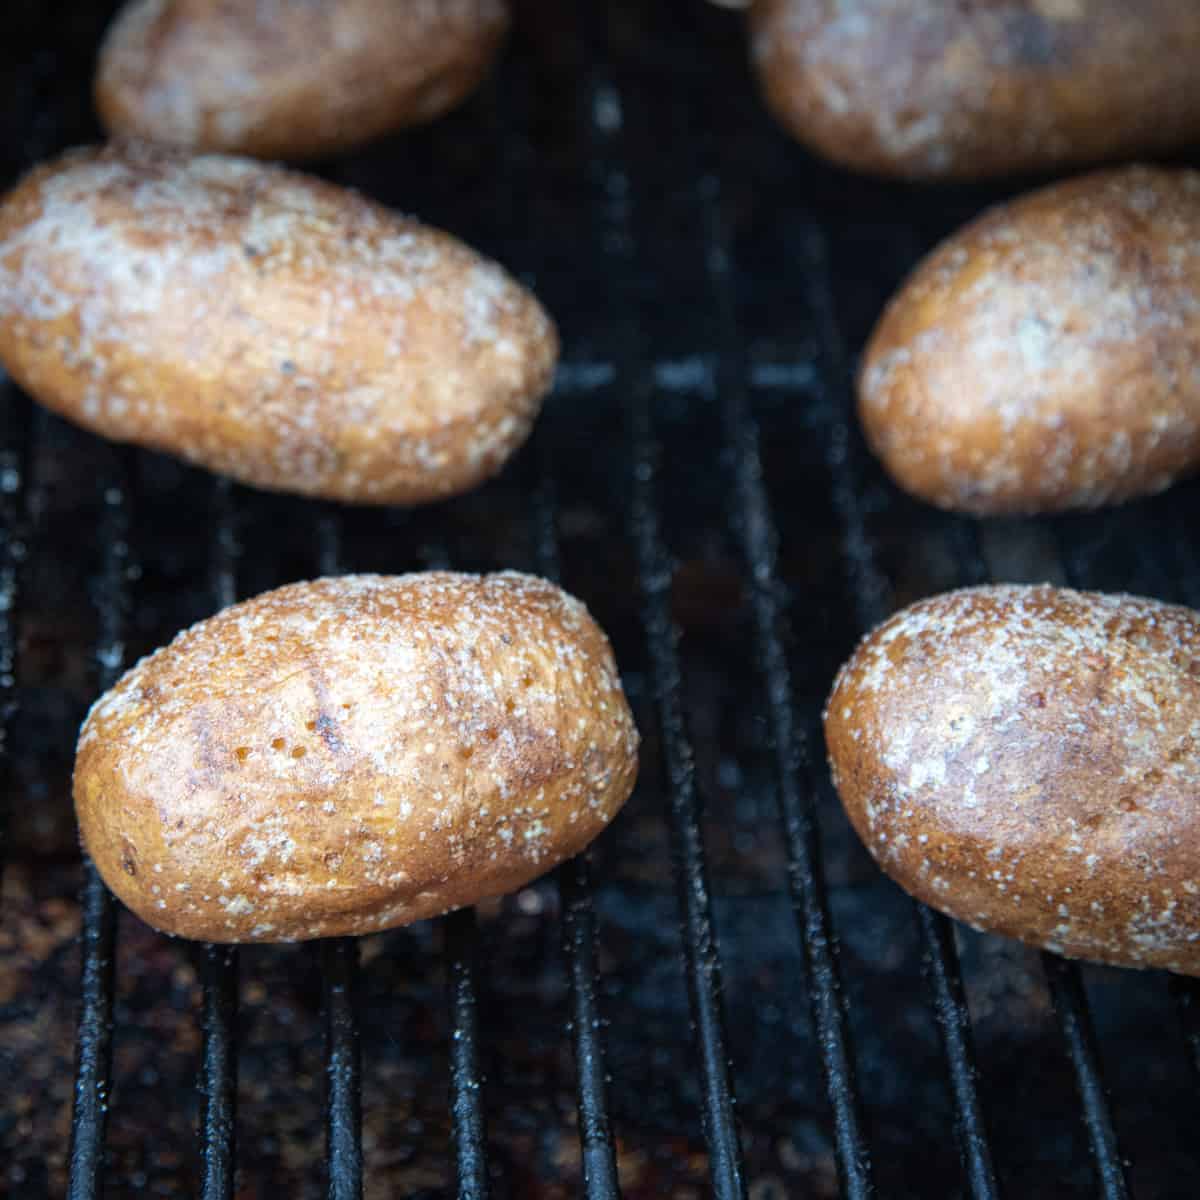 Baked potatoes on a Traeger grill.